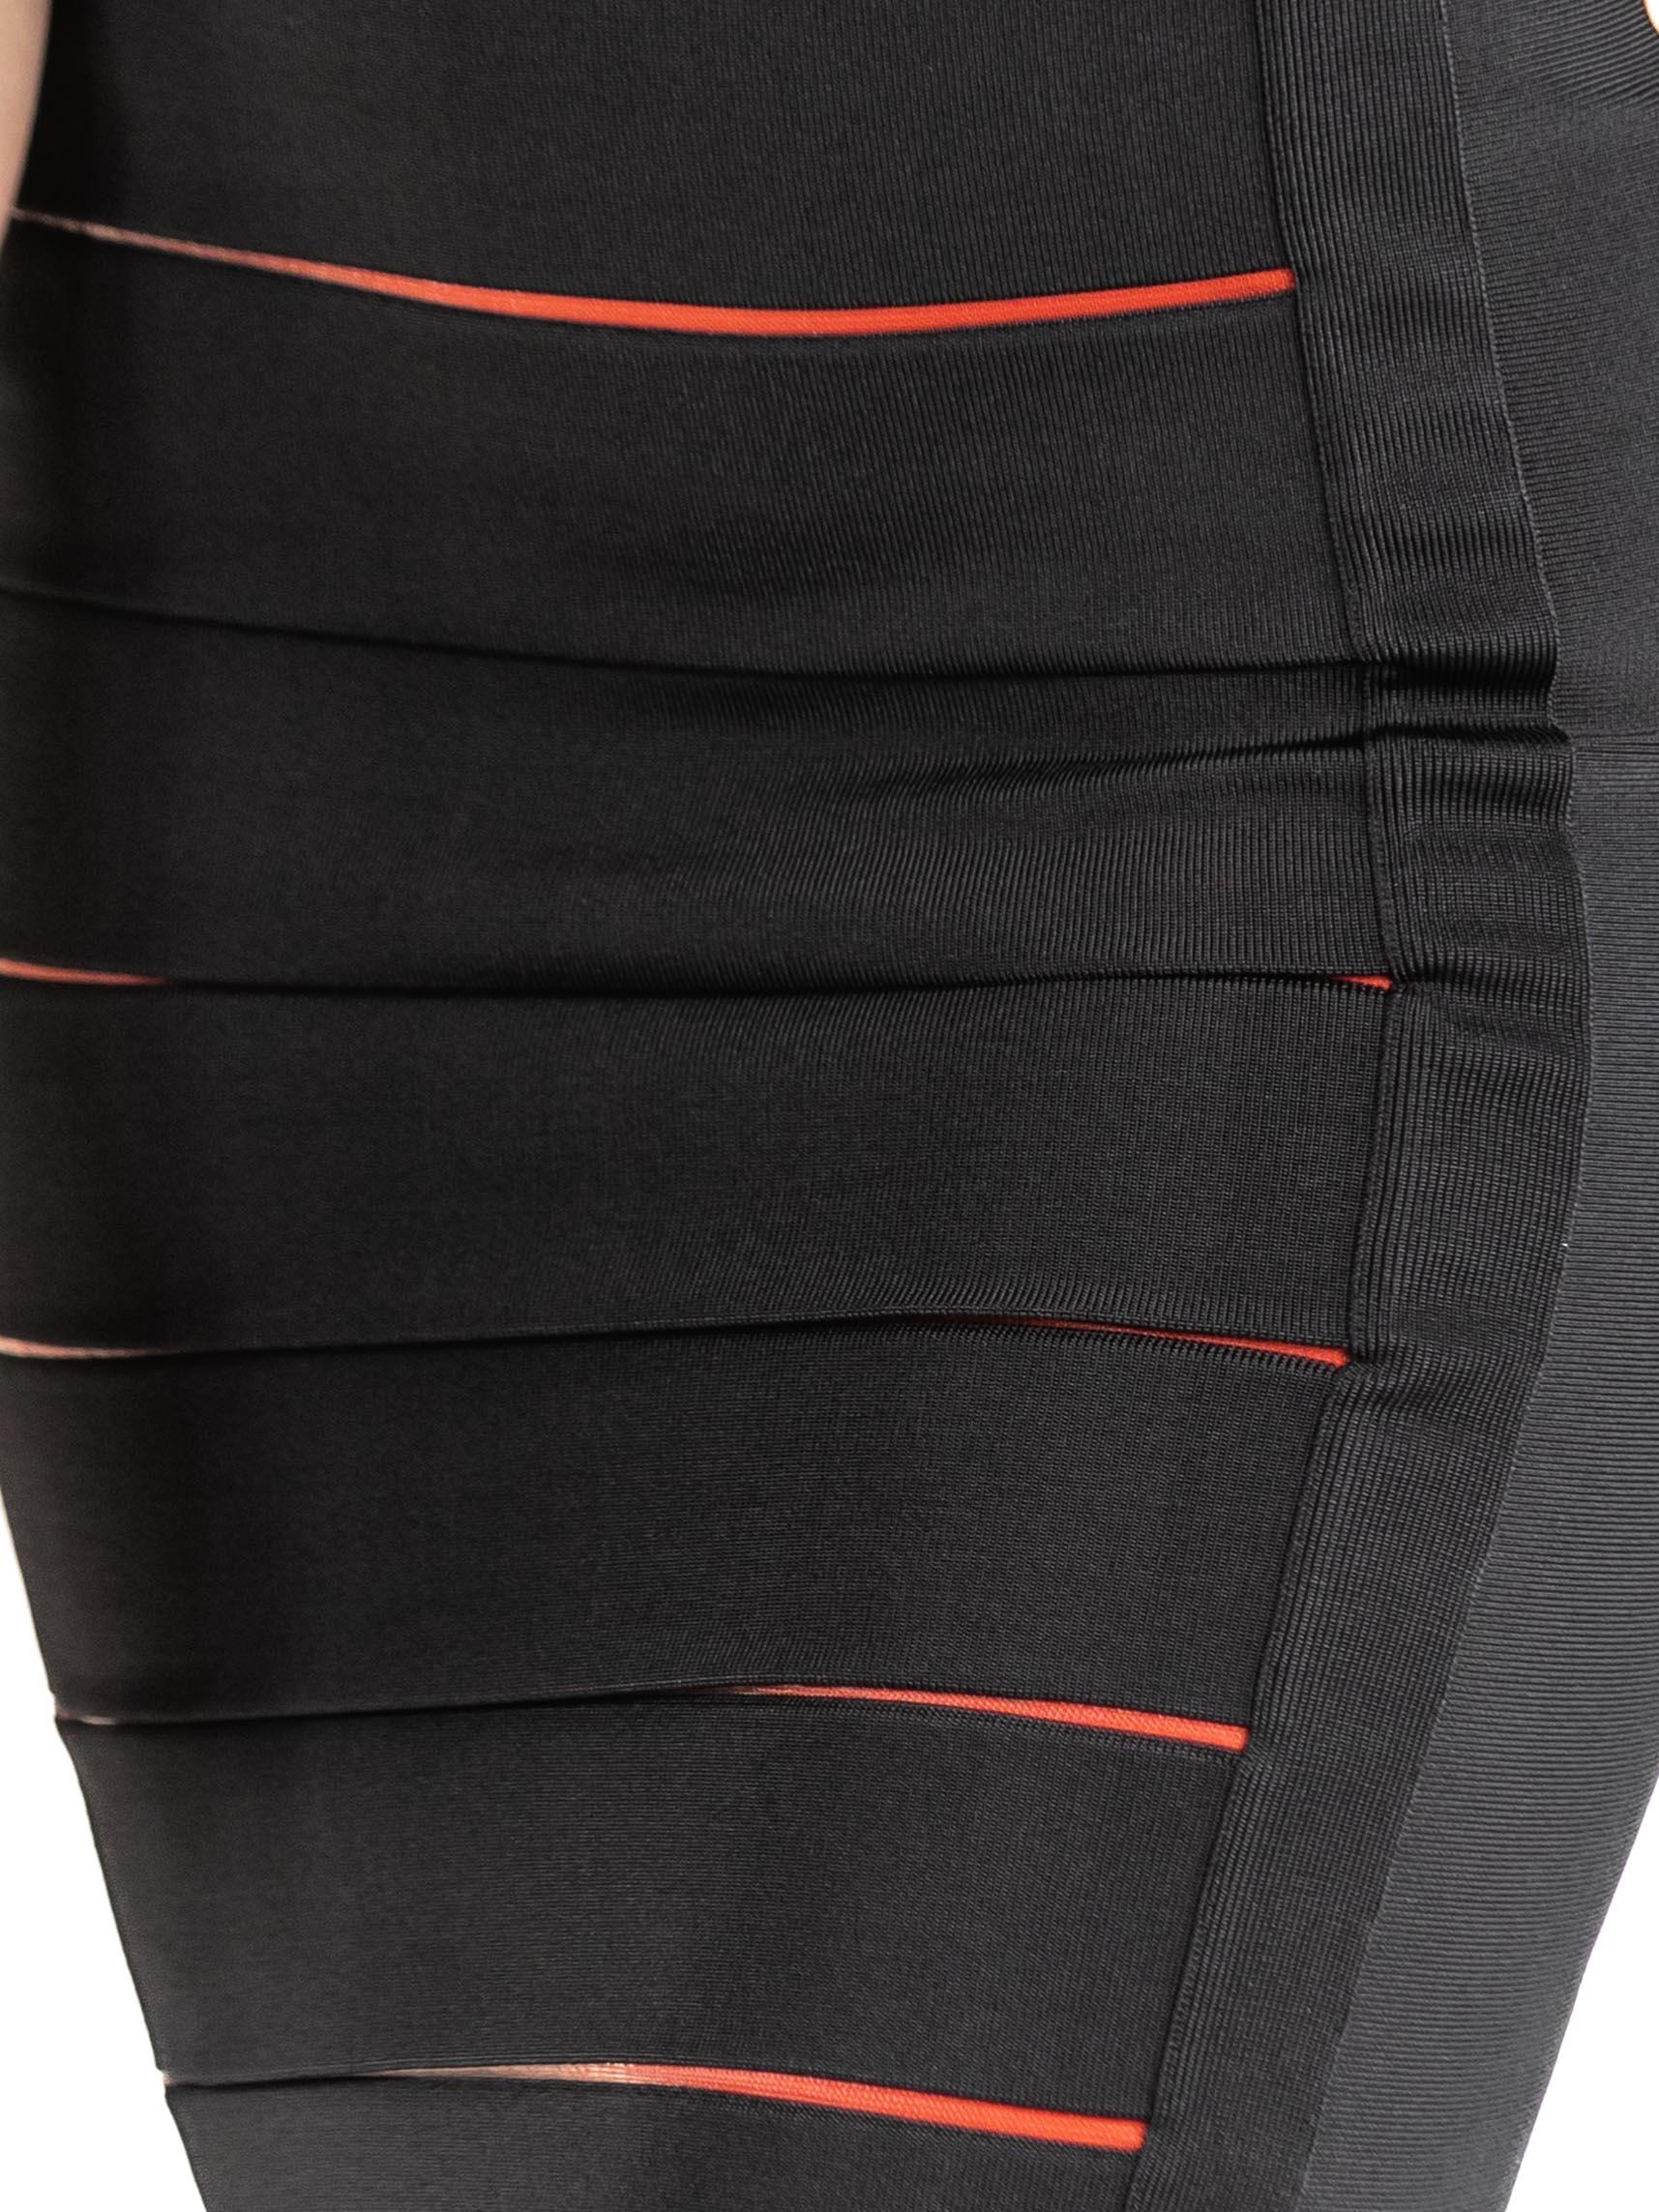 1990S HERVE LEGER Black & Red Rayon Blend Body-Con Cocktail Dress For Sale 6